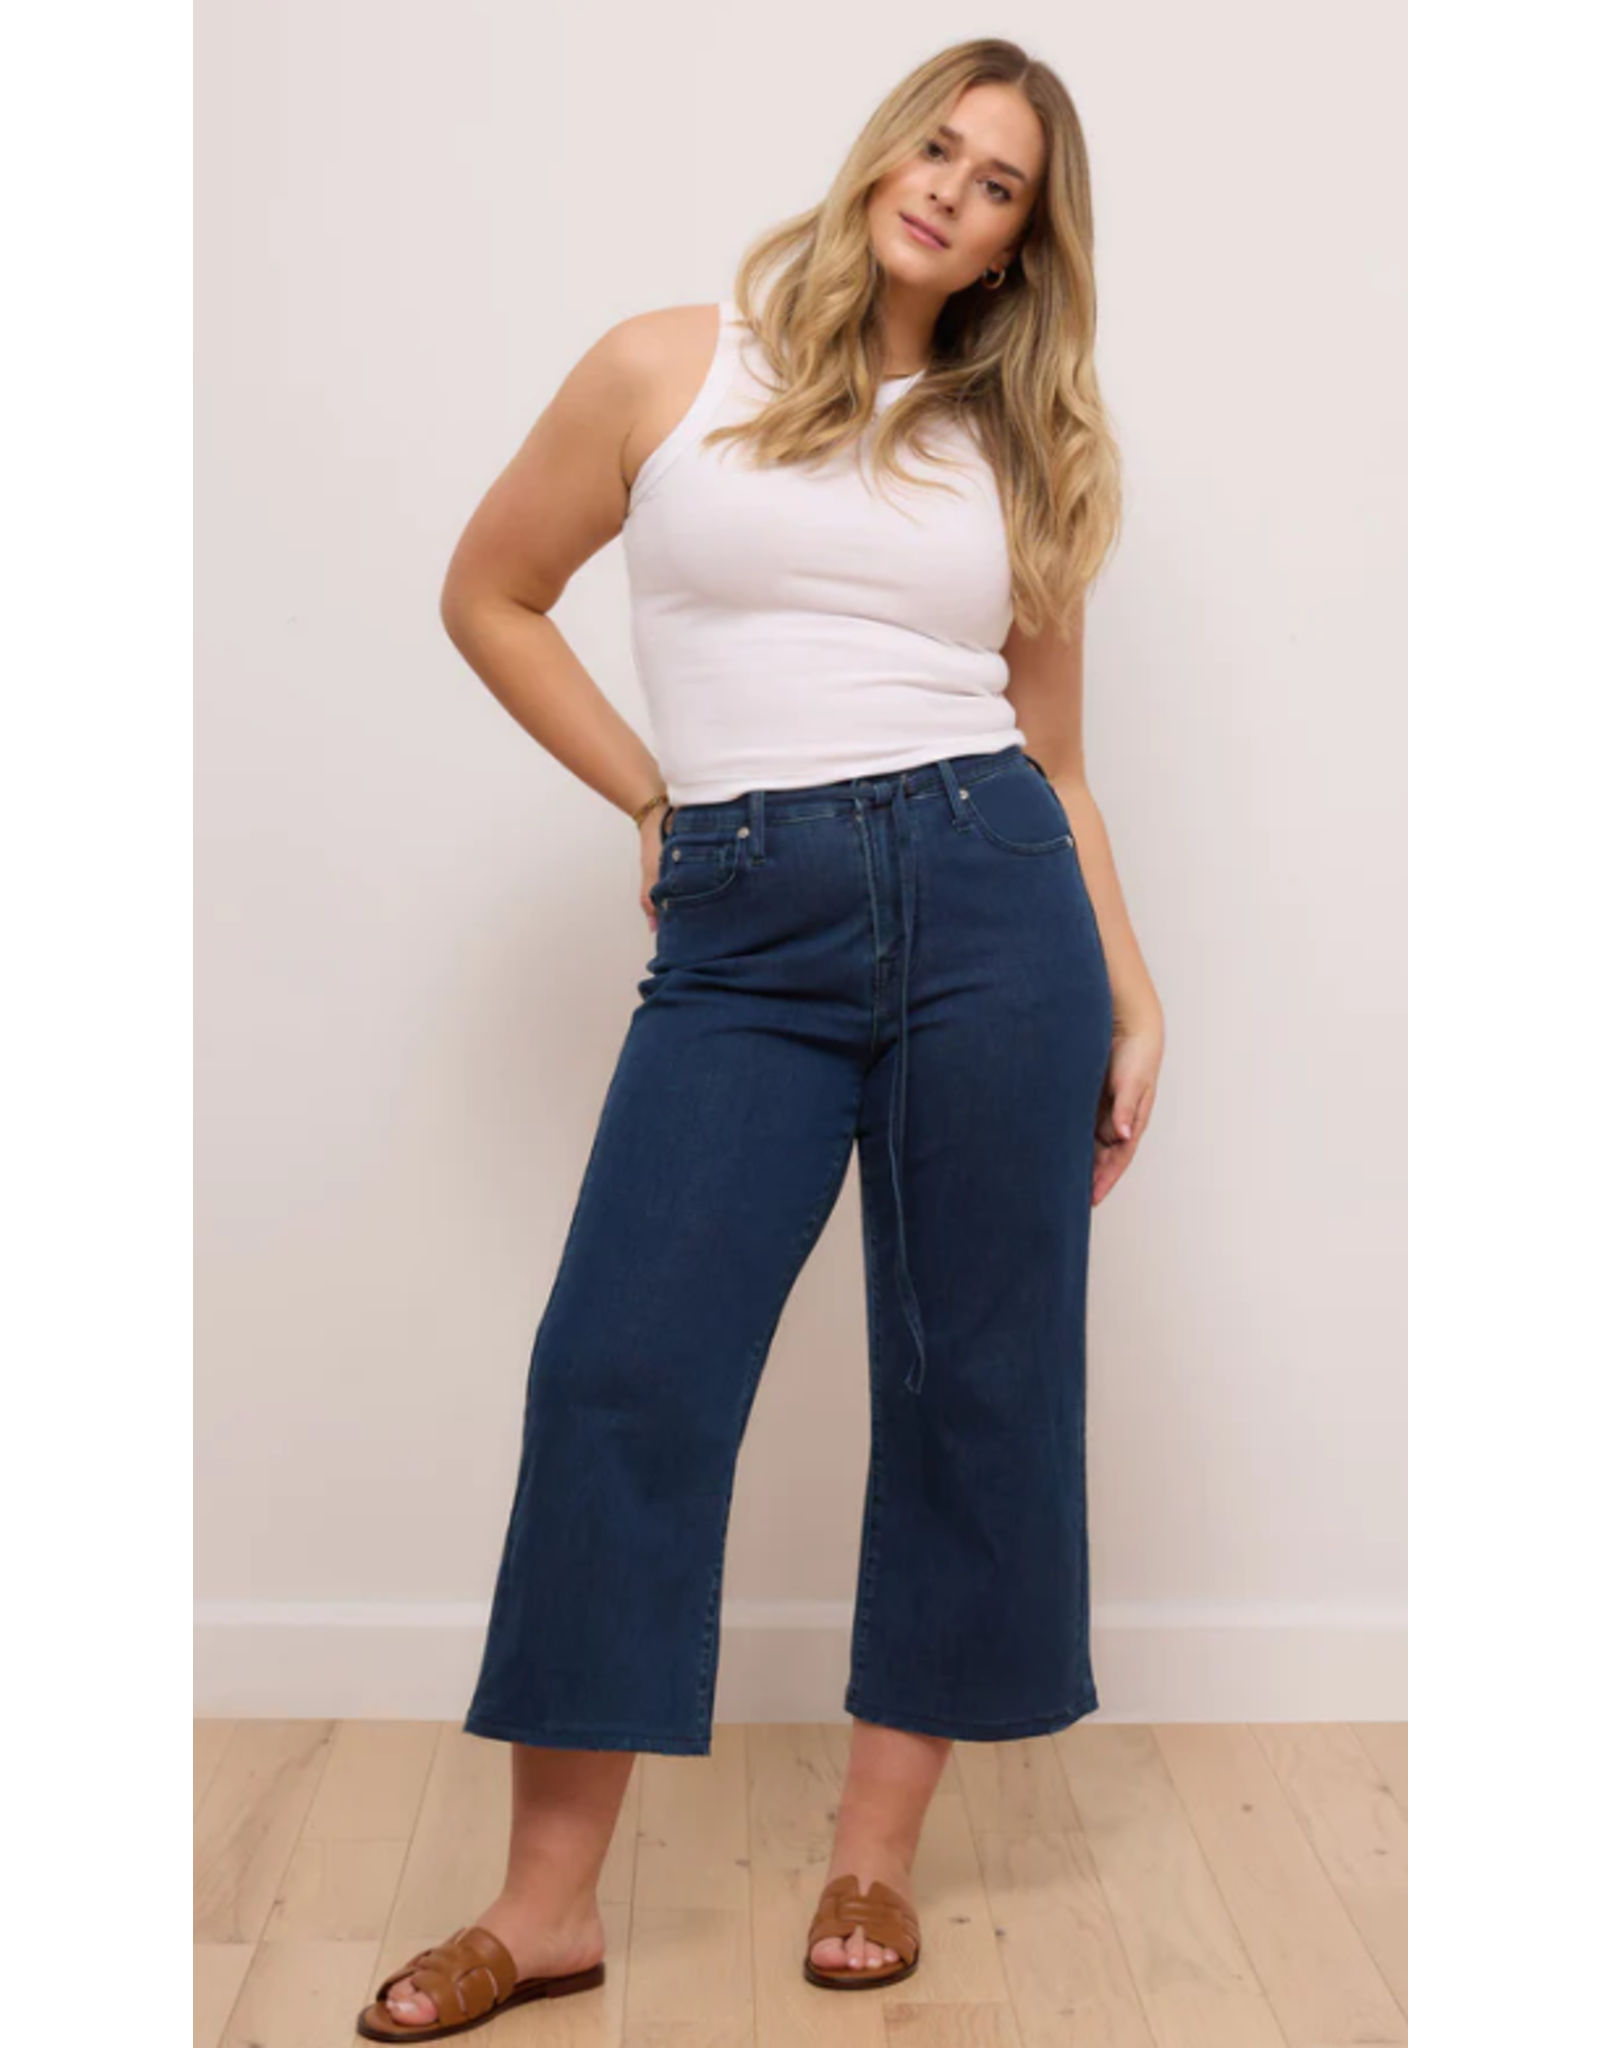 Jeans Lily - Yoga jeans